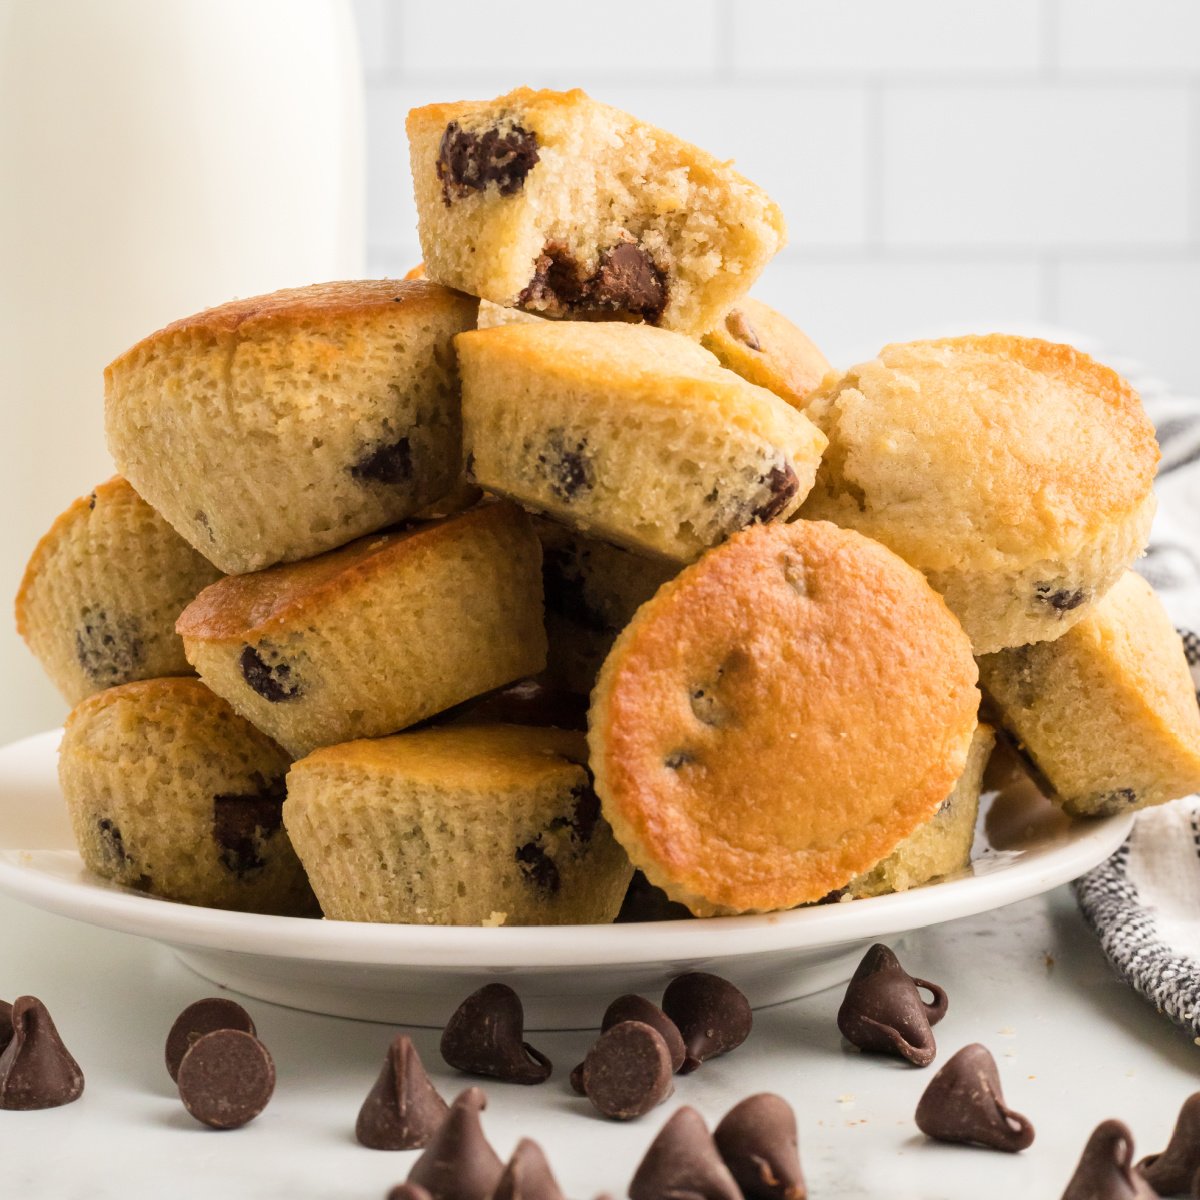 Round white plate fully stacked with chocolate chip air fryer muffins baked in the air fryer with chocolate chips sprinkled around on the table in front of the plate.